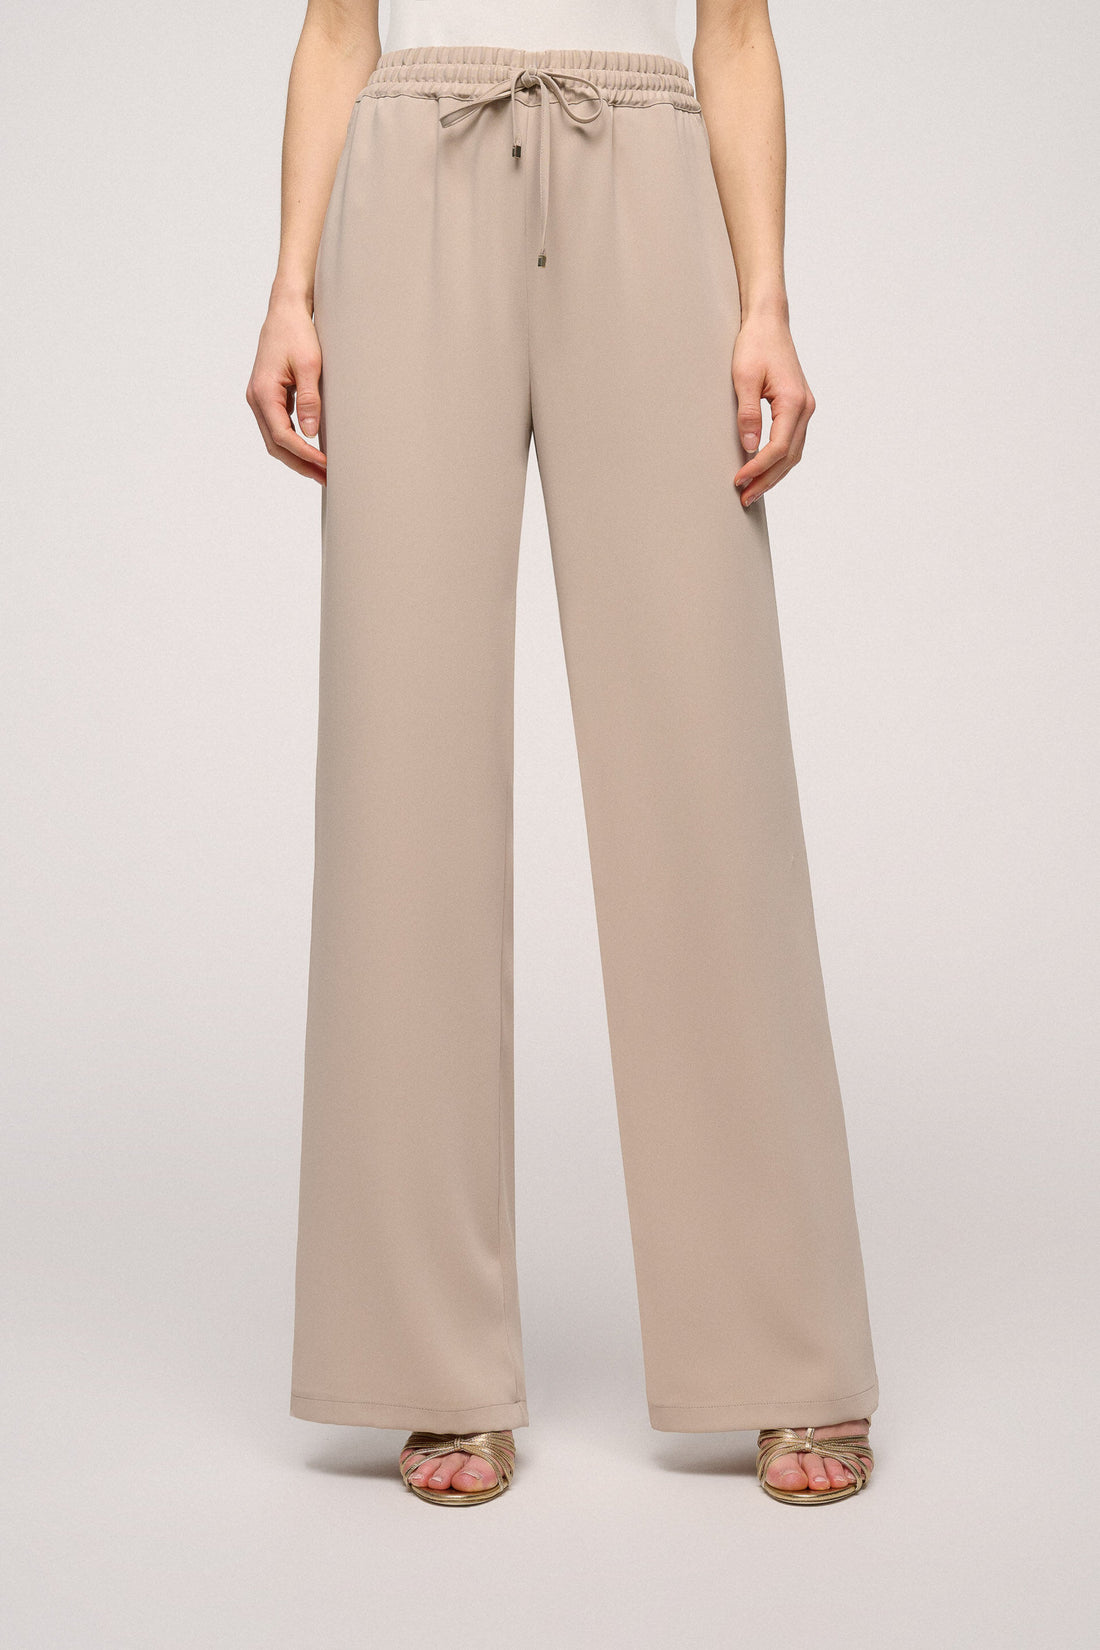 Wide Leg Slip On Trousers With Drawstring_Angelica C_1137_01